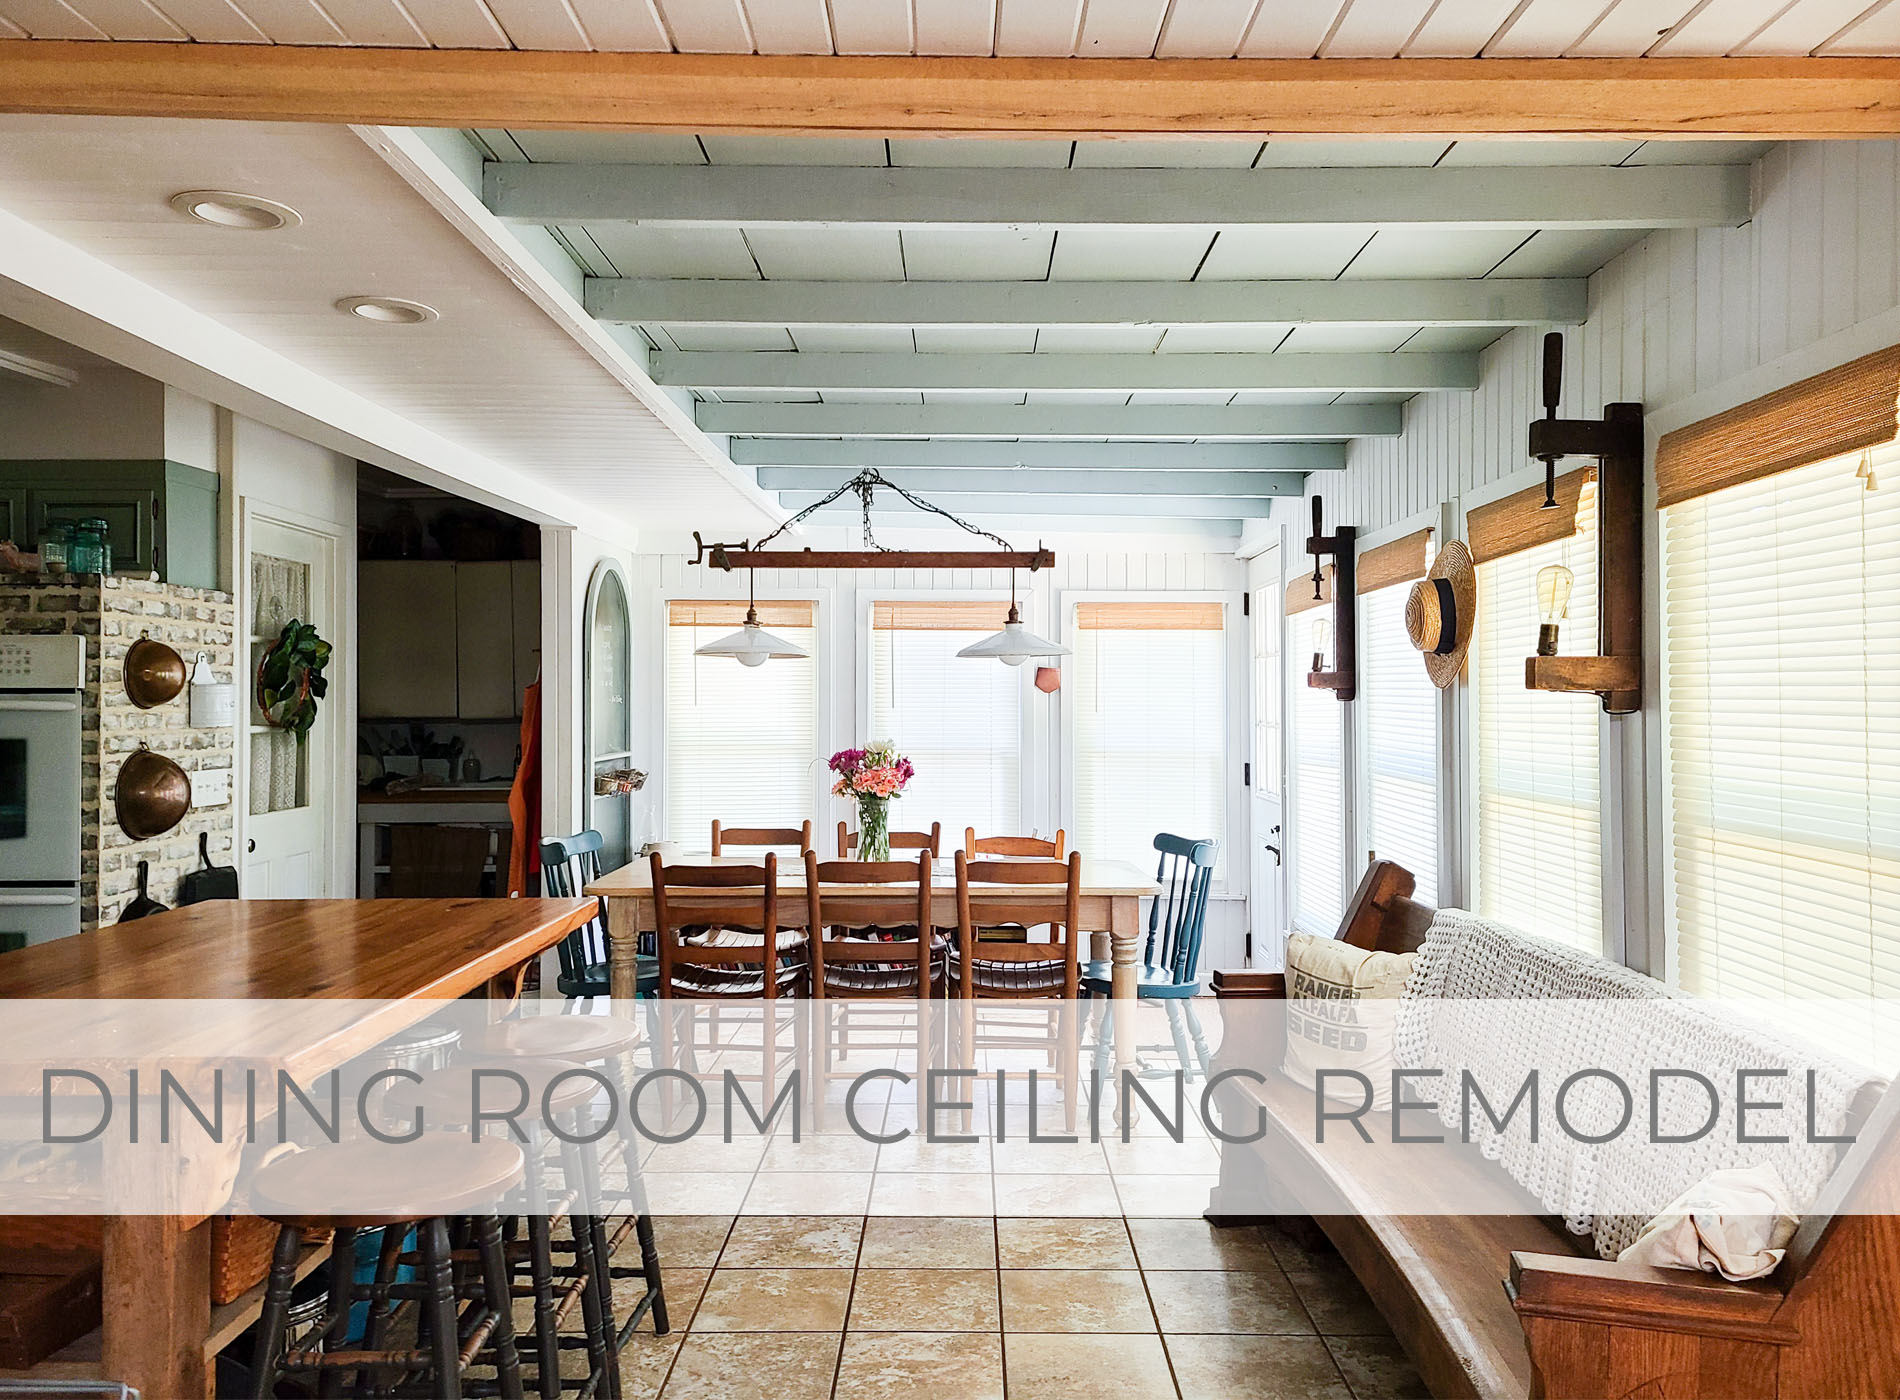 Farmhouse Dining Room Ceiling Remodel by Larissa of Prodigal Pieces | prodigalpieces.com #prodigalpieces